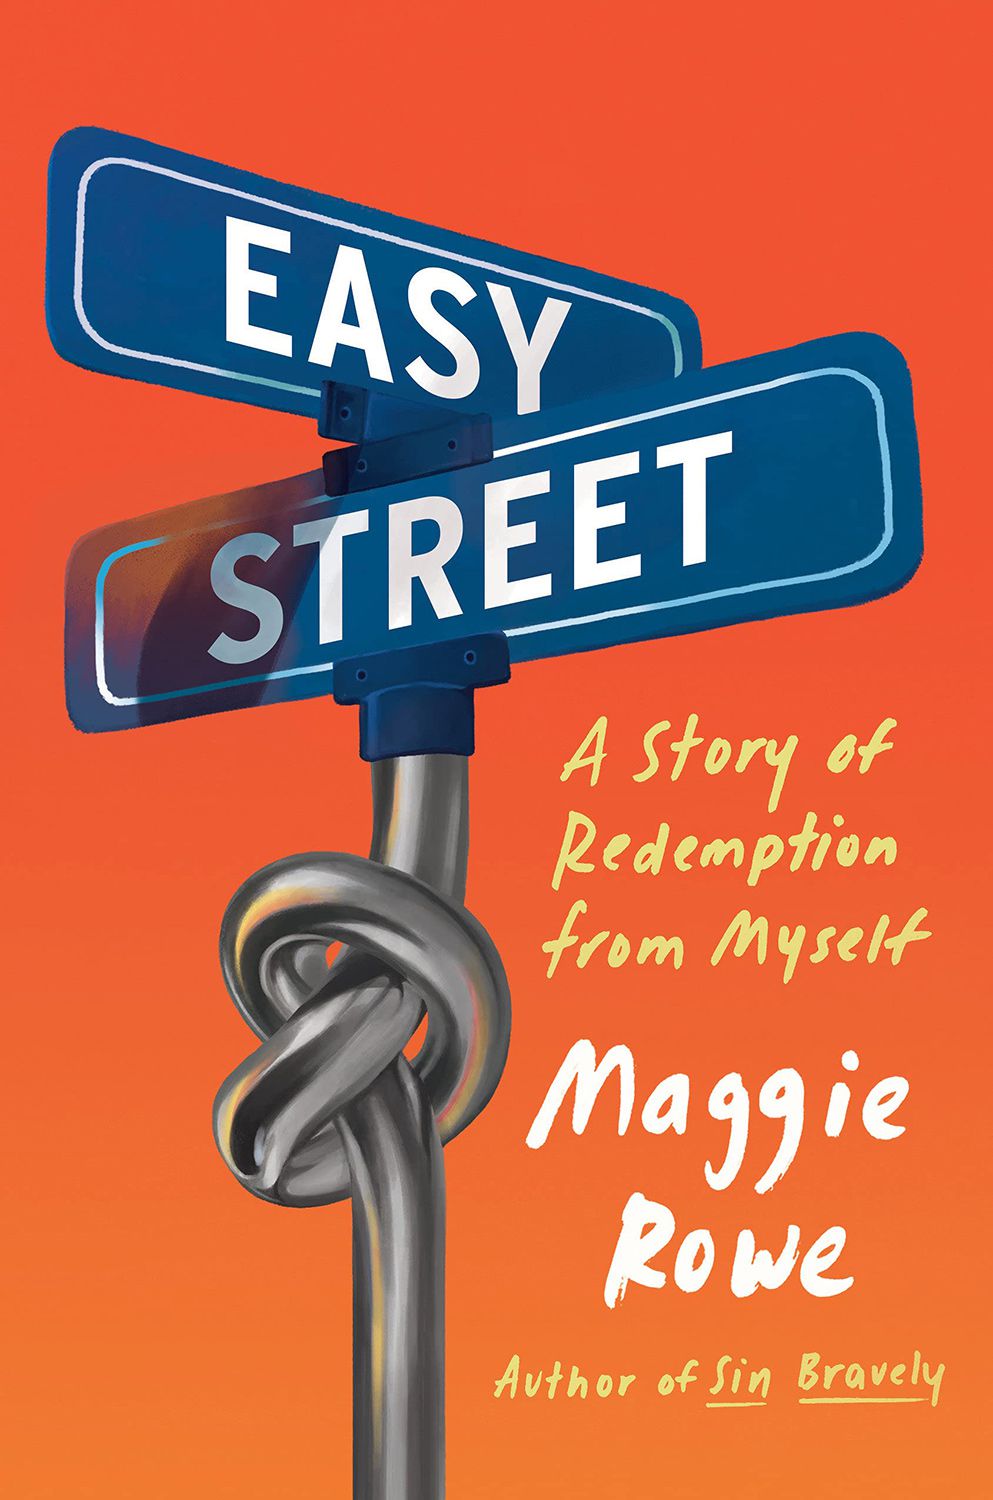 Easy Street: A Story of Redemption from Myself by Maggie Rowe